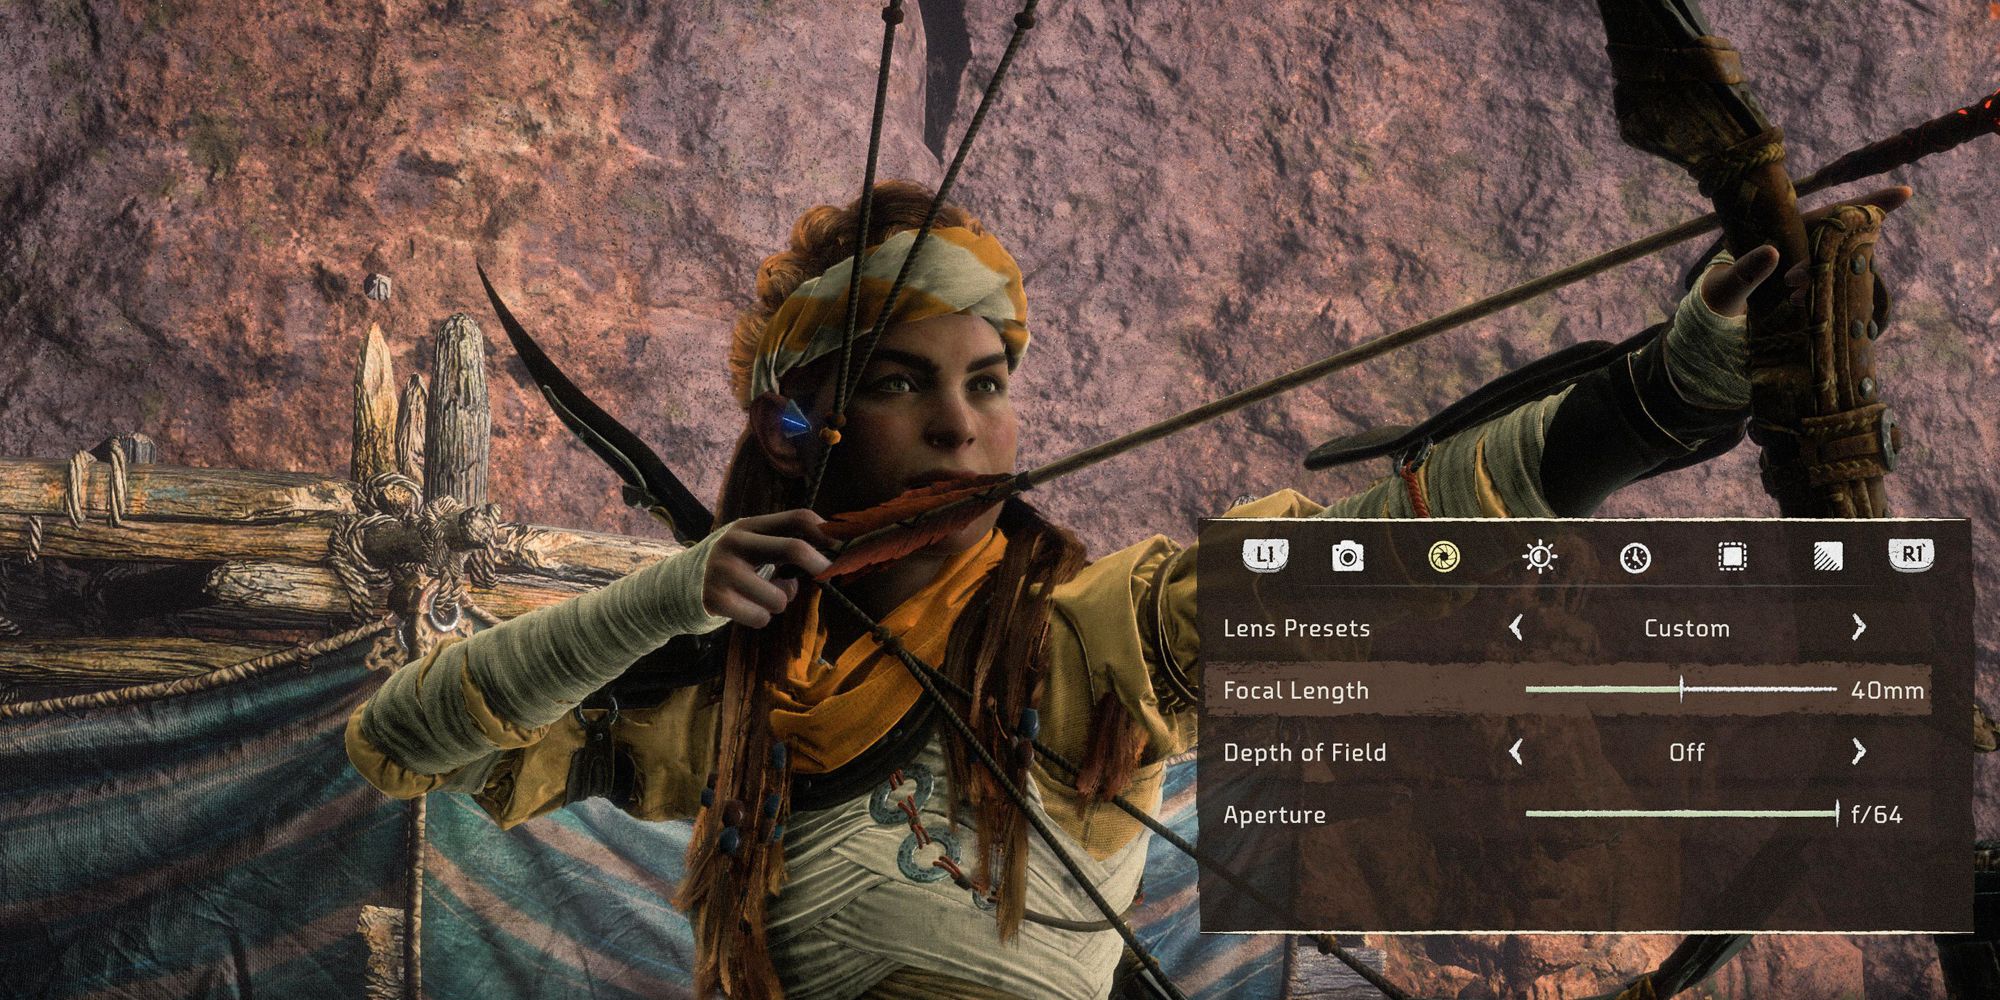 Horizon Forbidden West photo mode. Aloy aiming her bow with photo mode options on the screen.